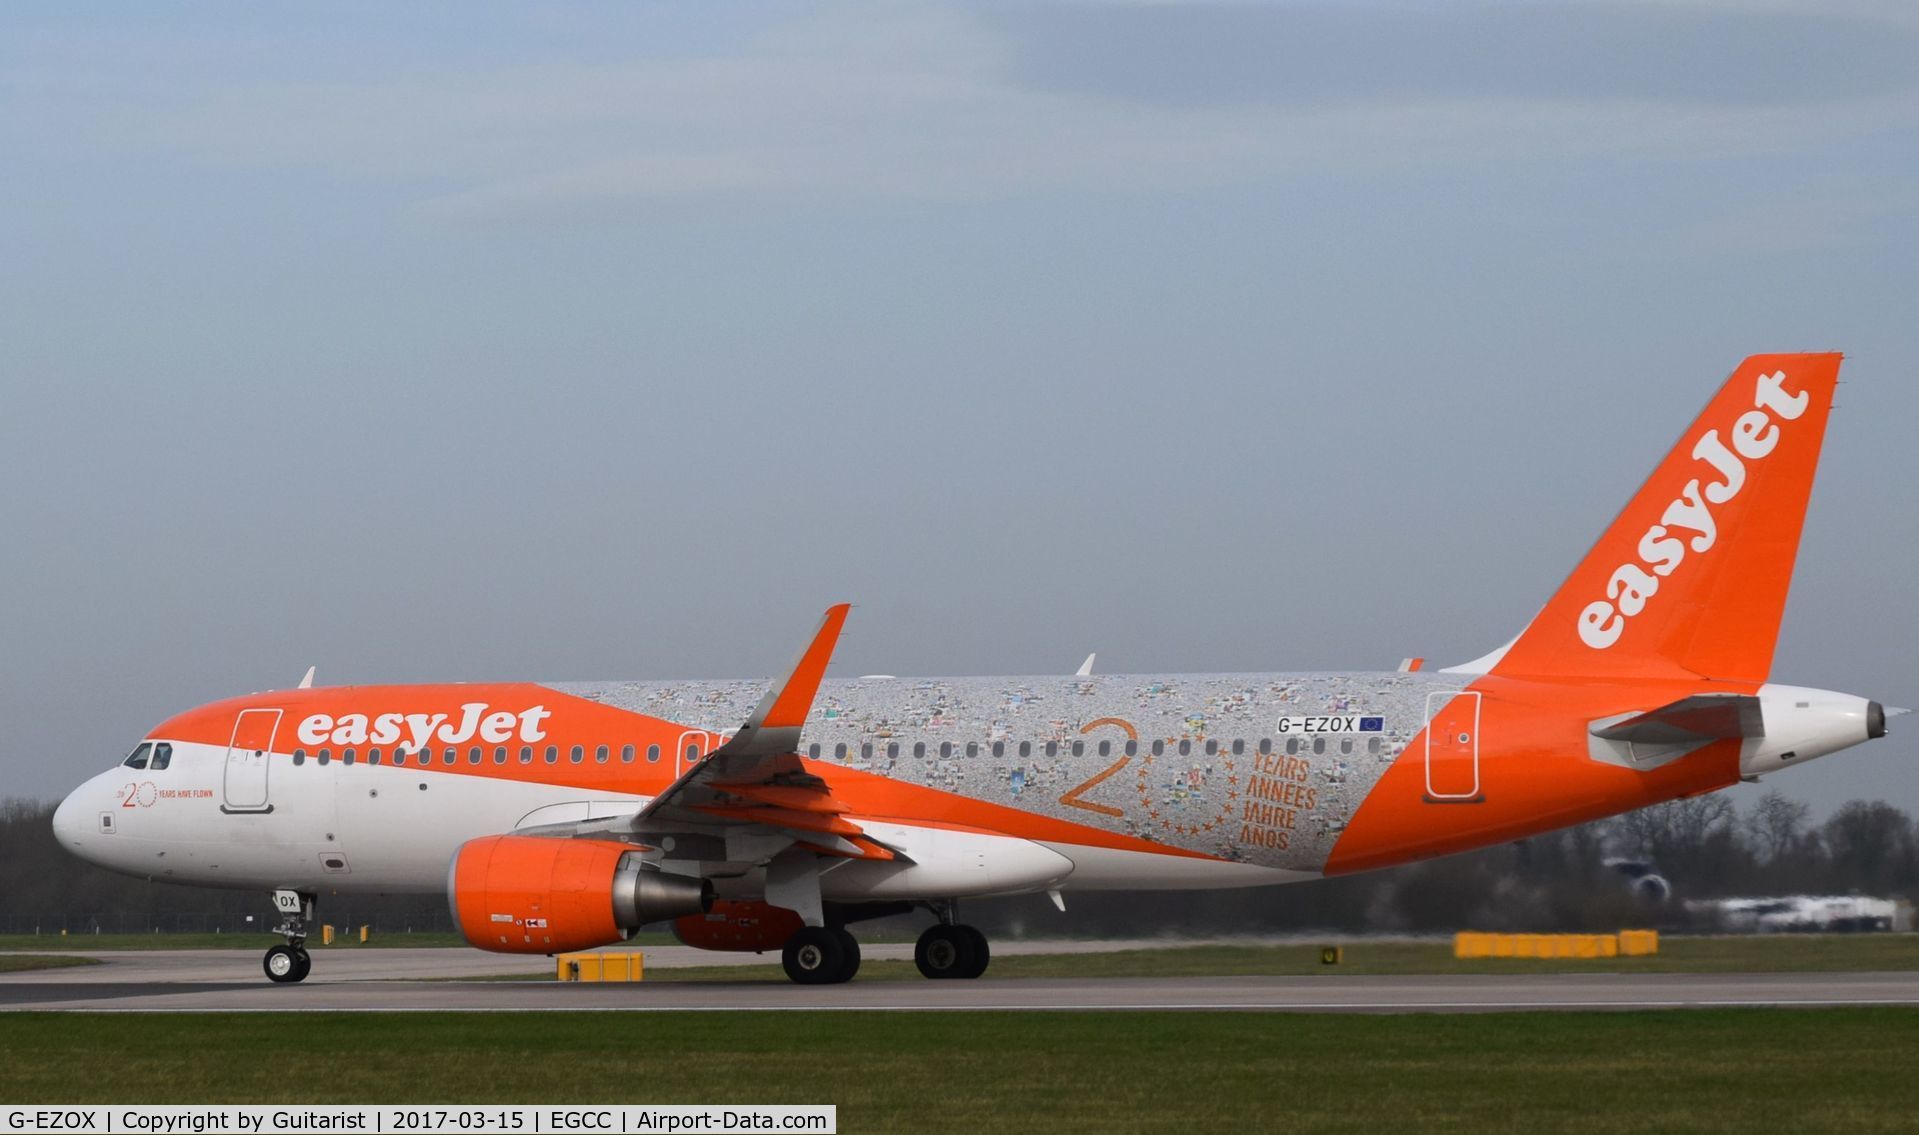 G-EZOX, 2015 Airbus A320-214 C/N 6837, At Manchester